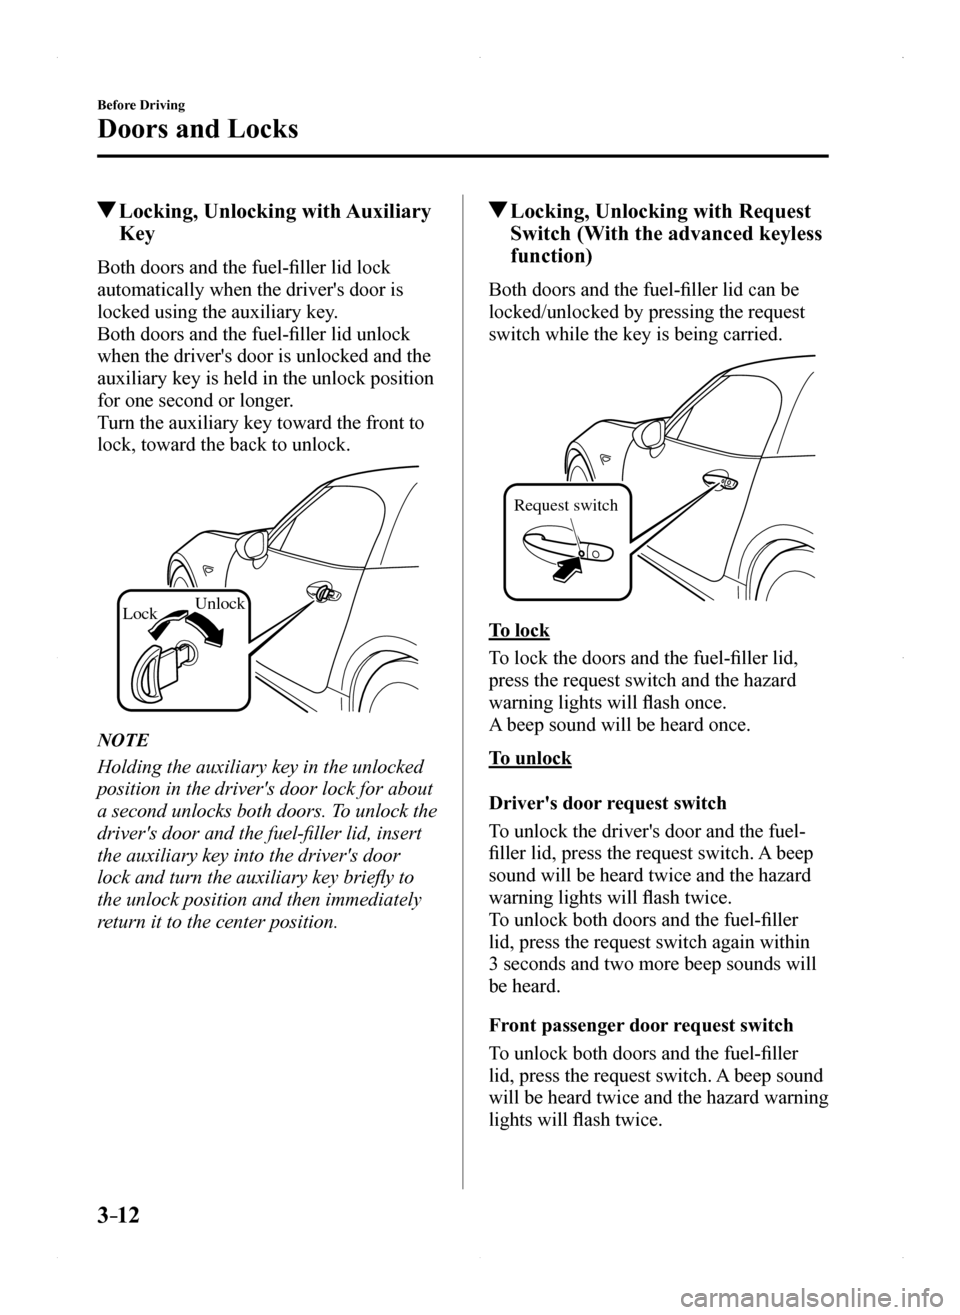 MAZDA MODEL MX-5 2016  Owners Manual (in English) 3–12
Before Driving
Doors and Locks
 Locking, Unlocking with Auxiliary 
Key
Both doors and the fuel-filler lid lock 
automatically when the drivers door is 
locked using the auxiliary key.
Both doo